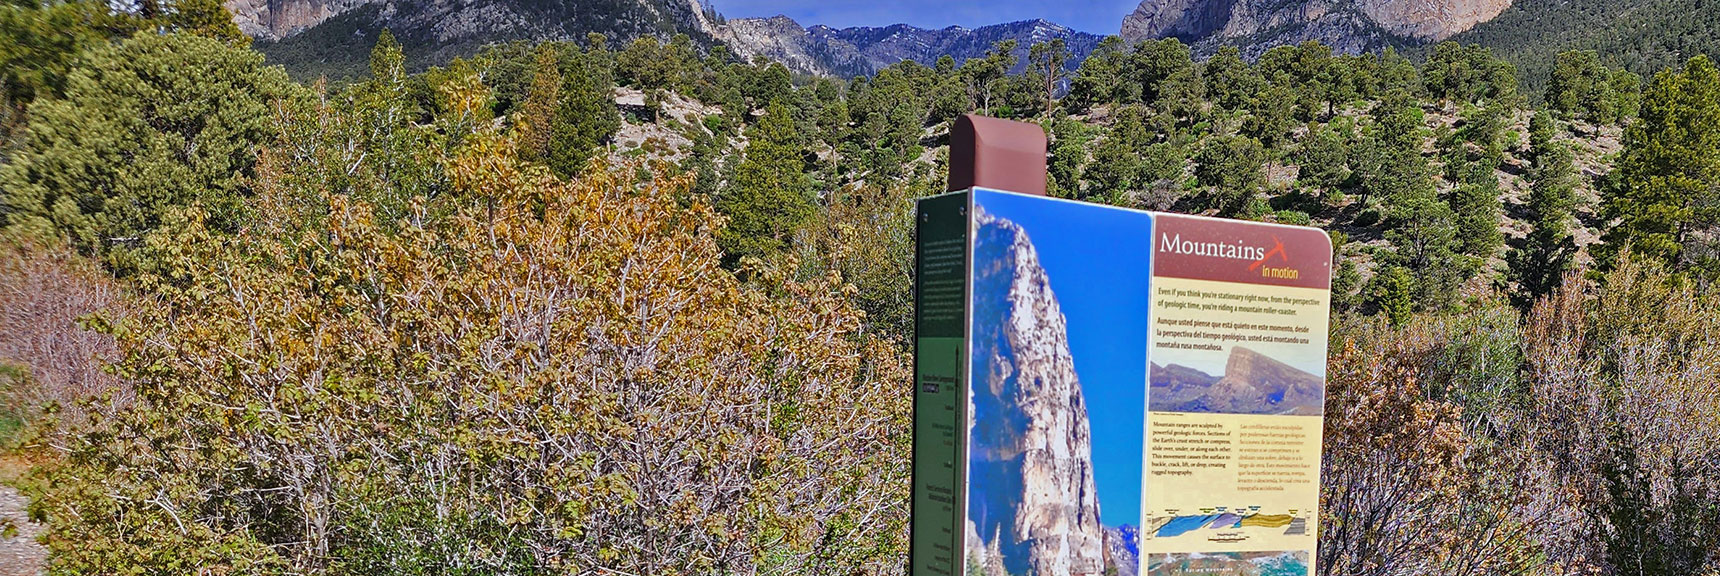 Geological Display on Dynamic Formation of Surrounding Mountains Which Continues Today | Acastus Trail | Mt Charleston Wilderness | Spring Mountains, Nevada